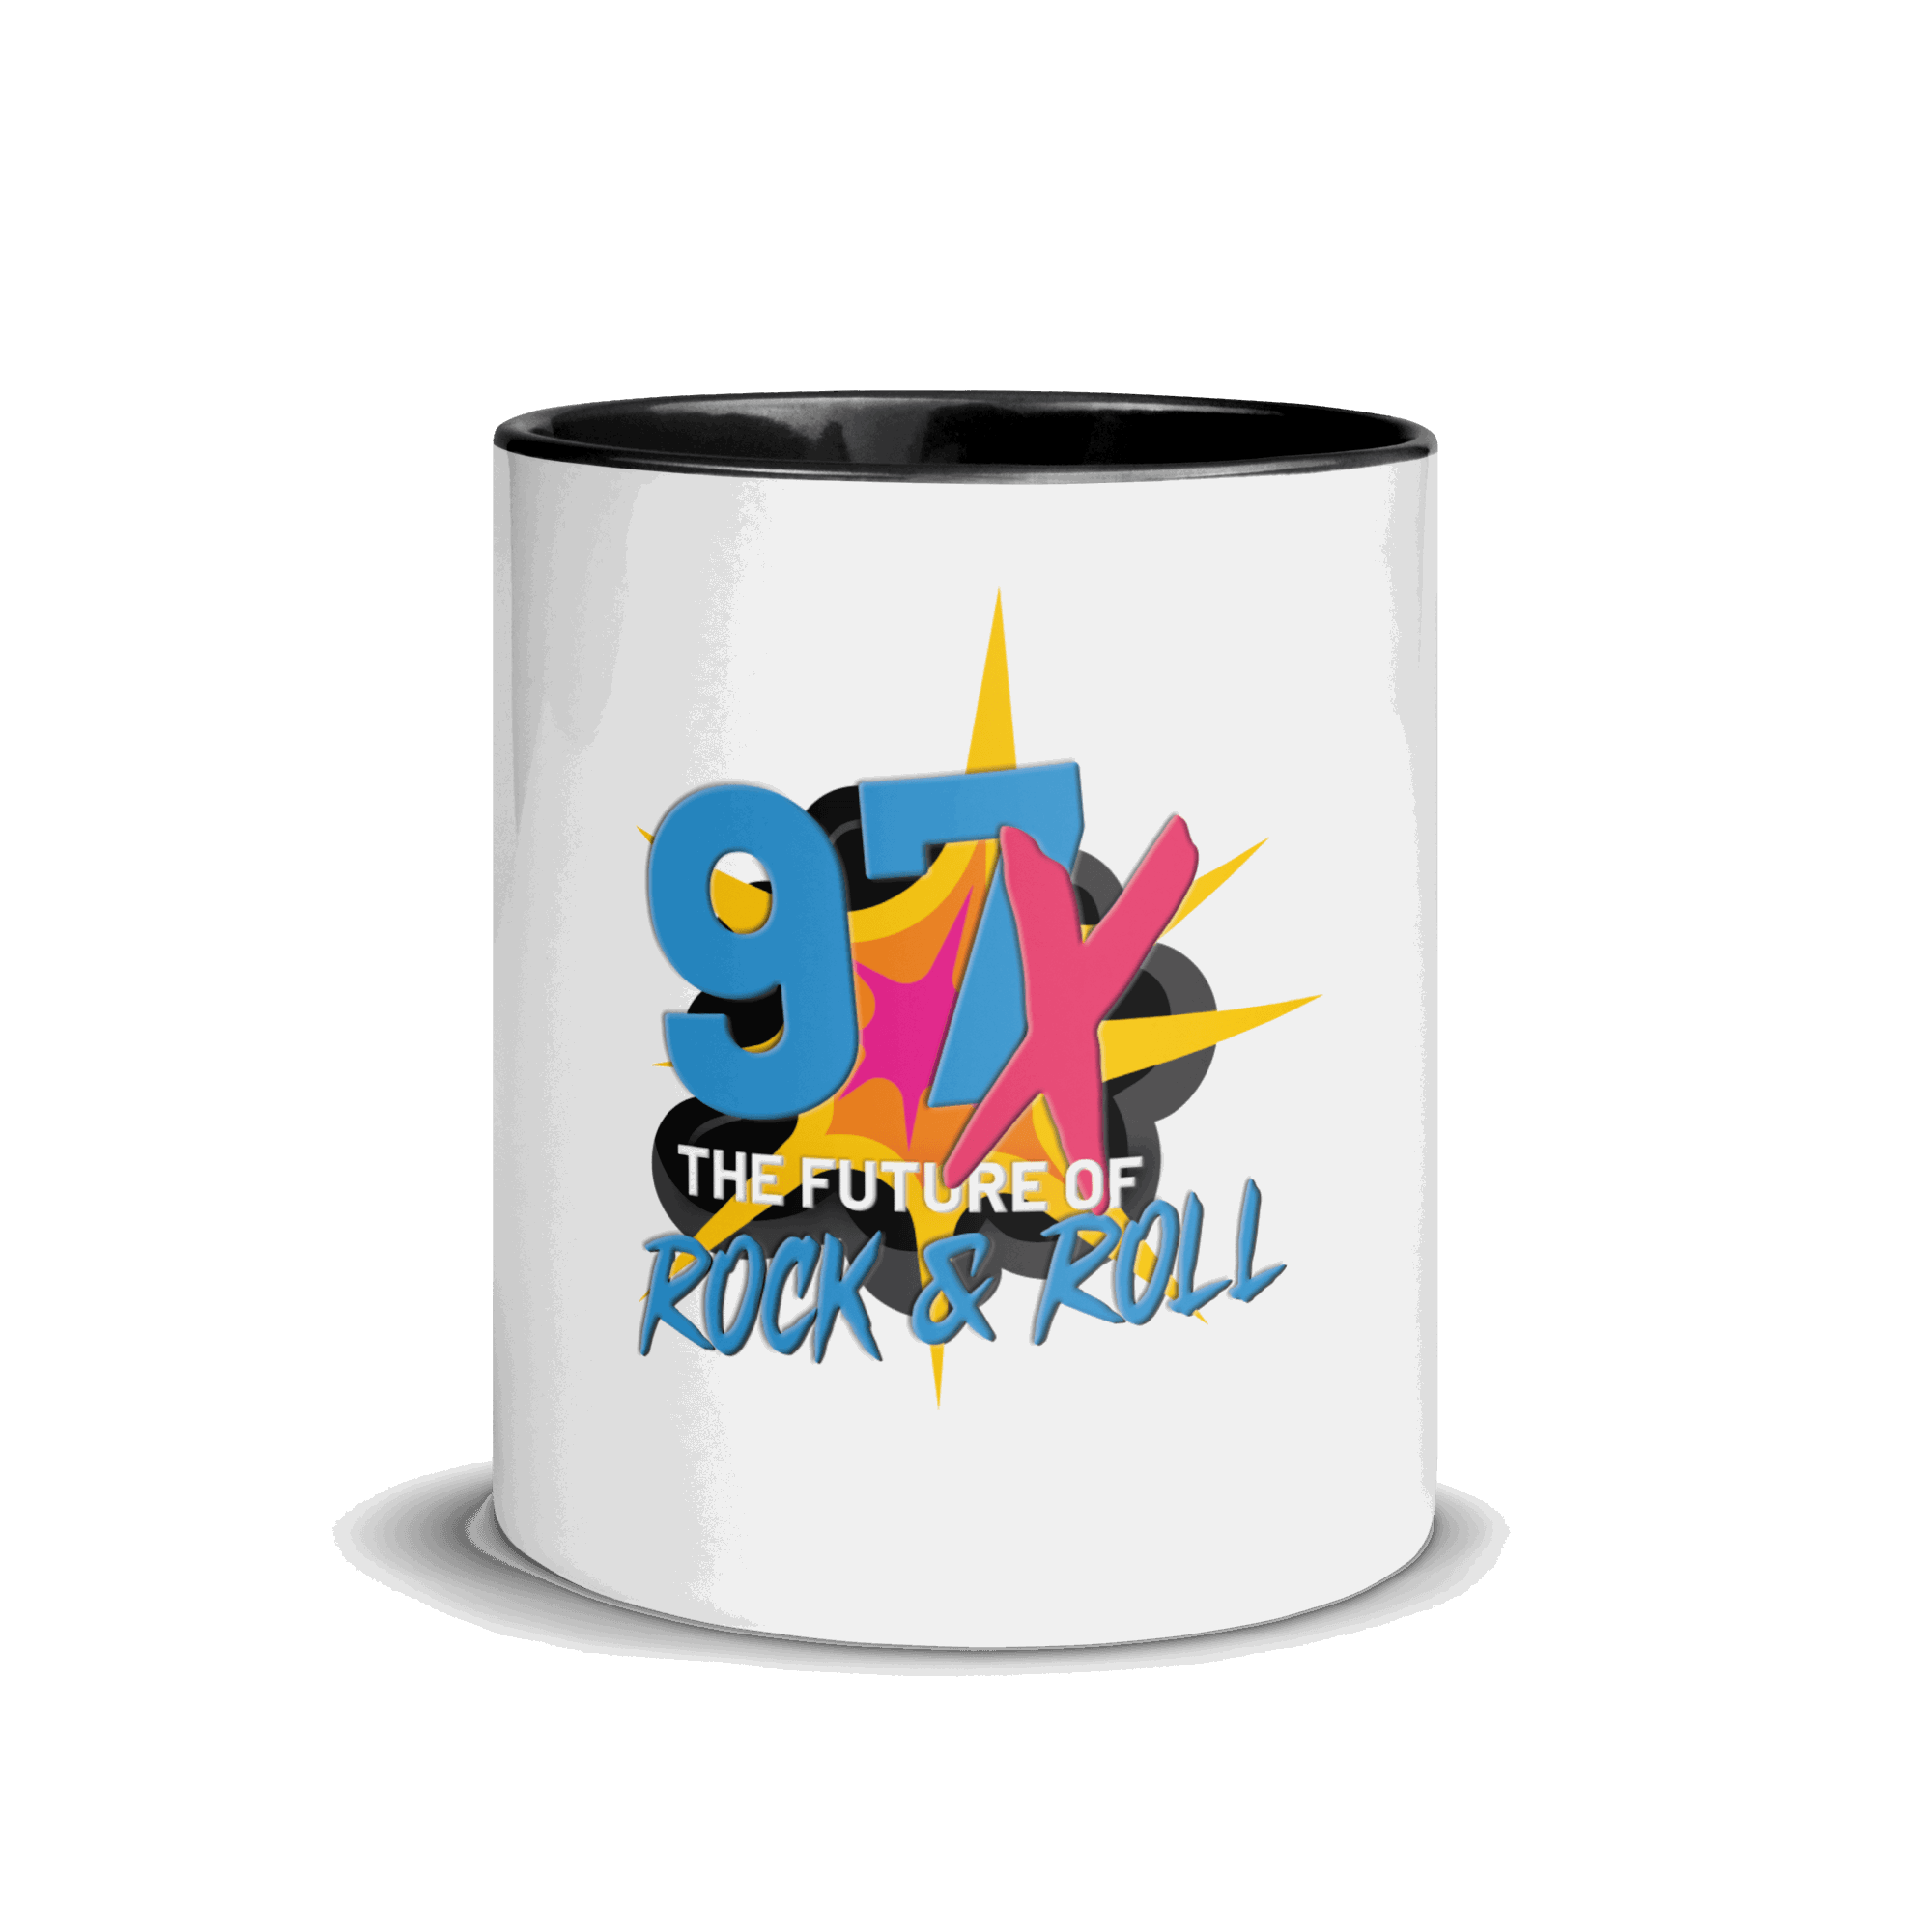 97x The Future Of Rock n Roll Mug with Color Inside VAWDesigns